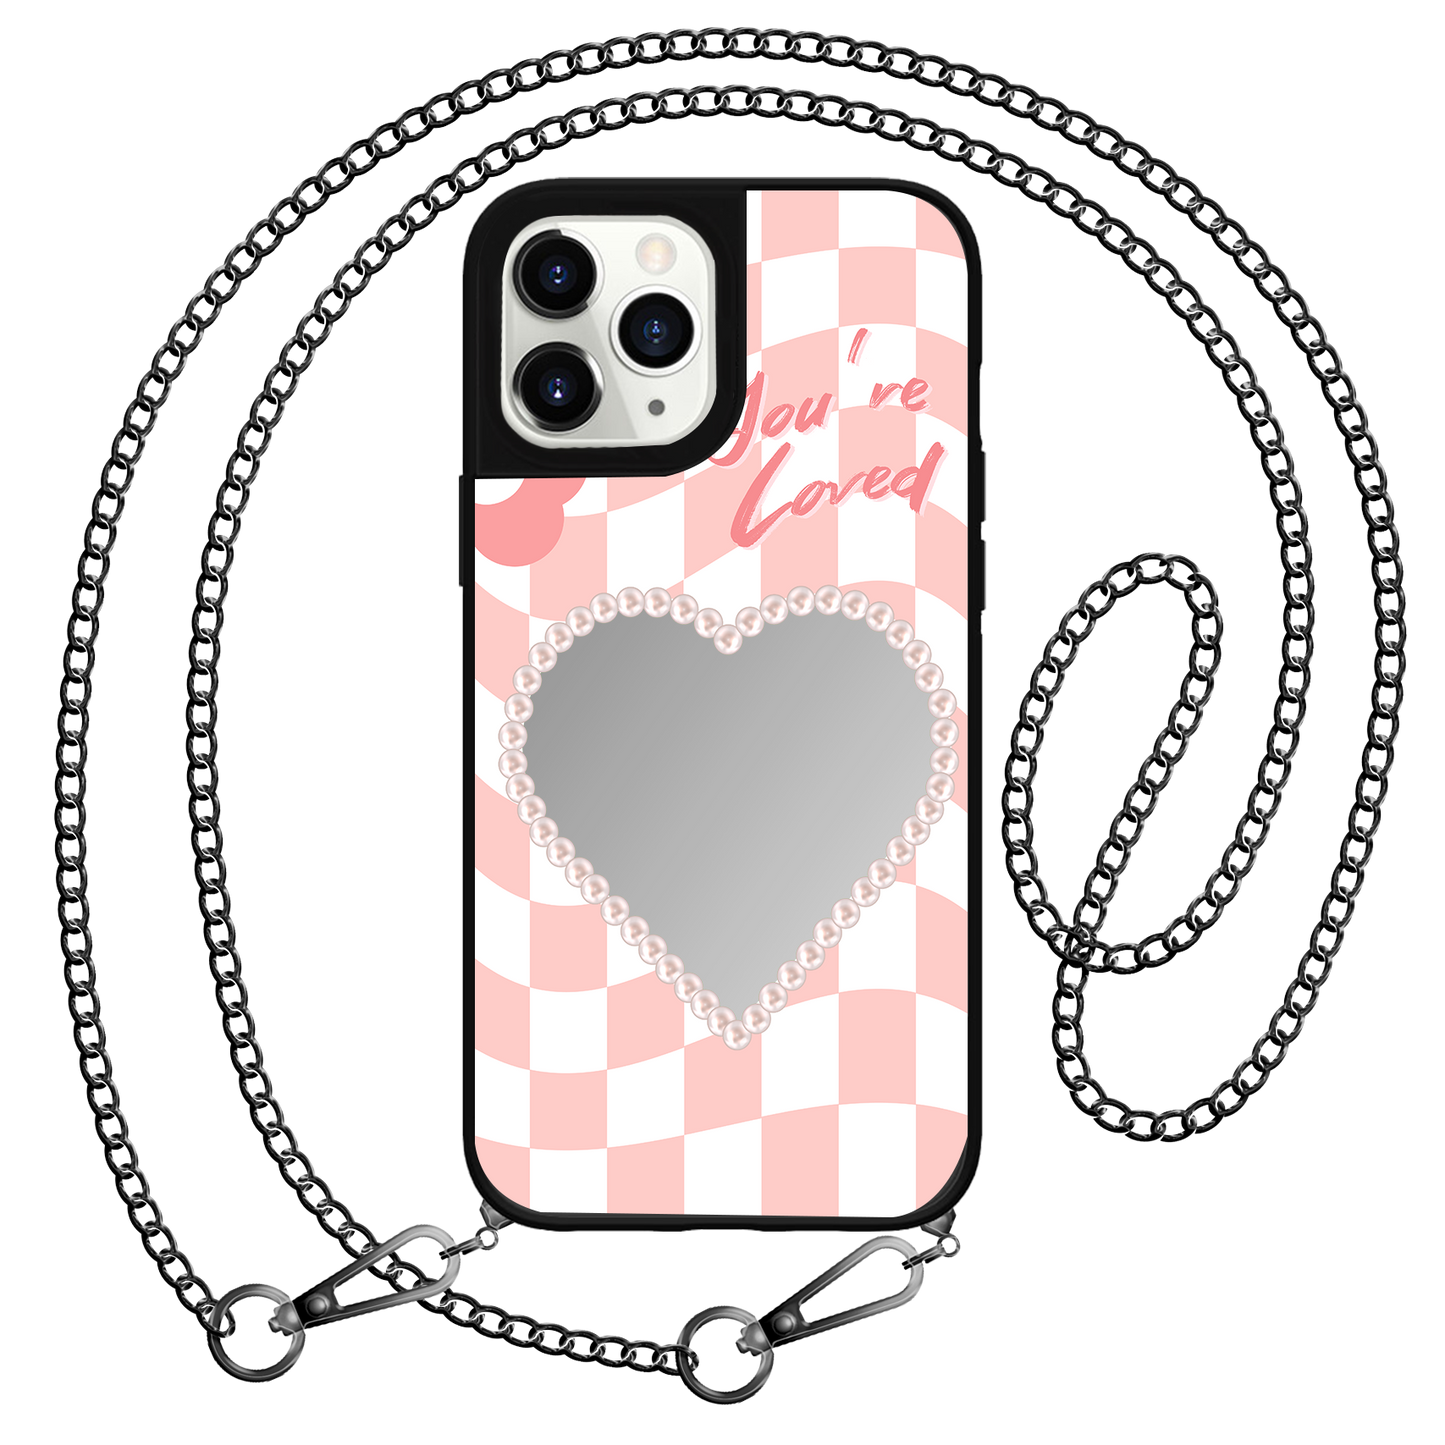 iPhone Mirror Grip Case - You're Loved